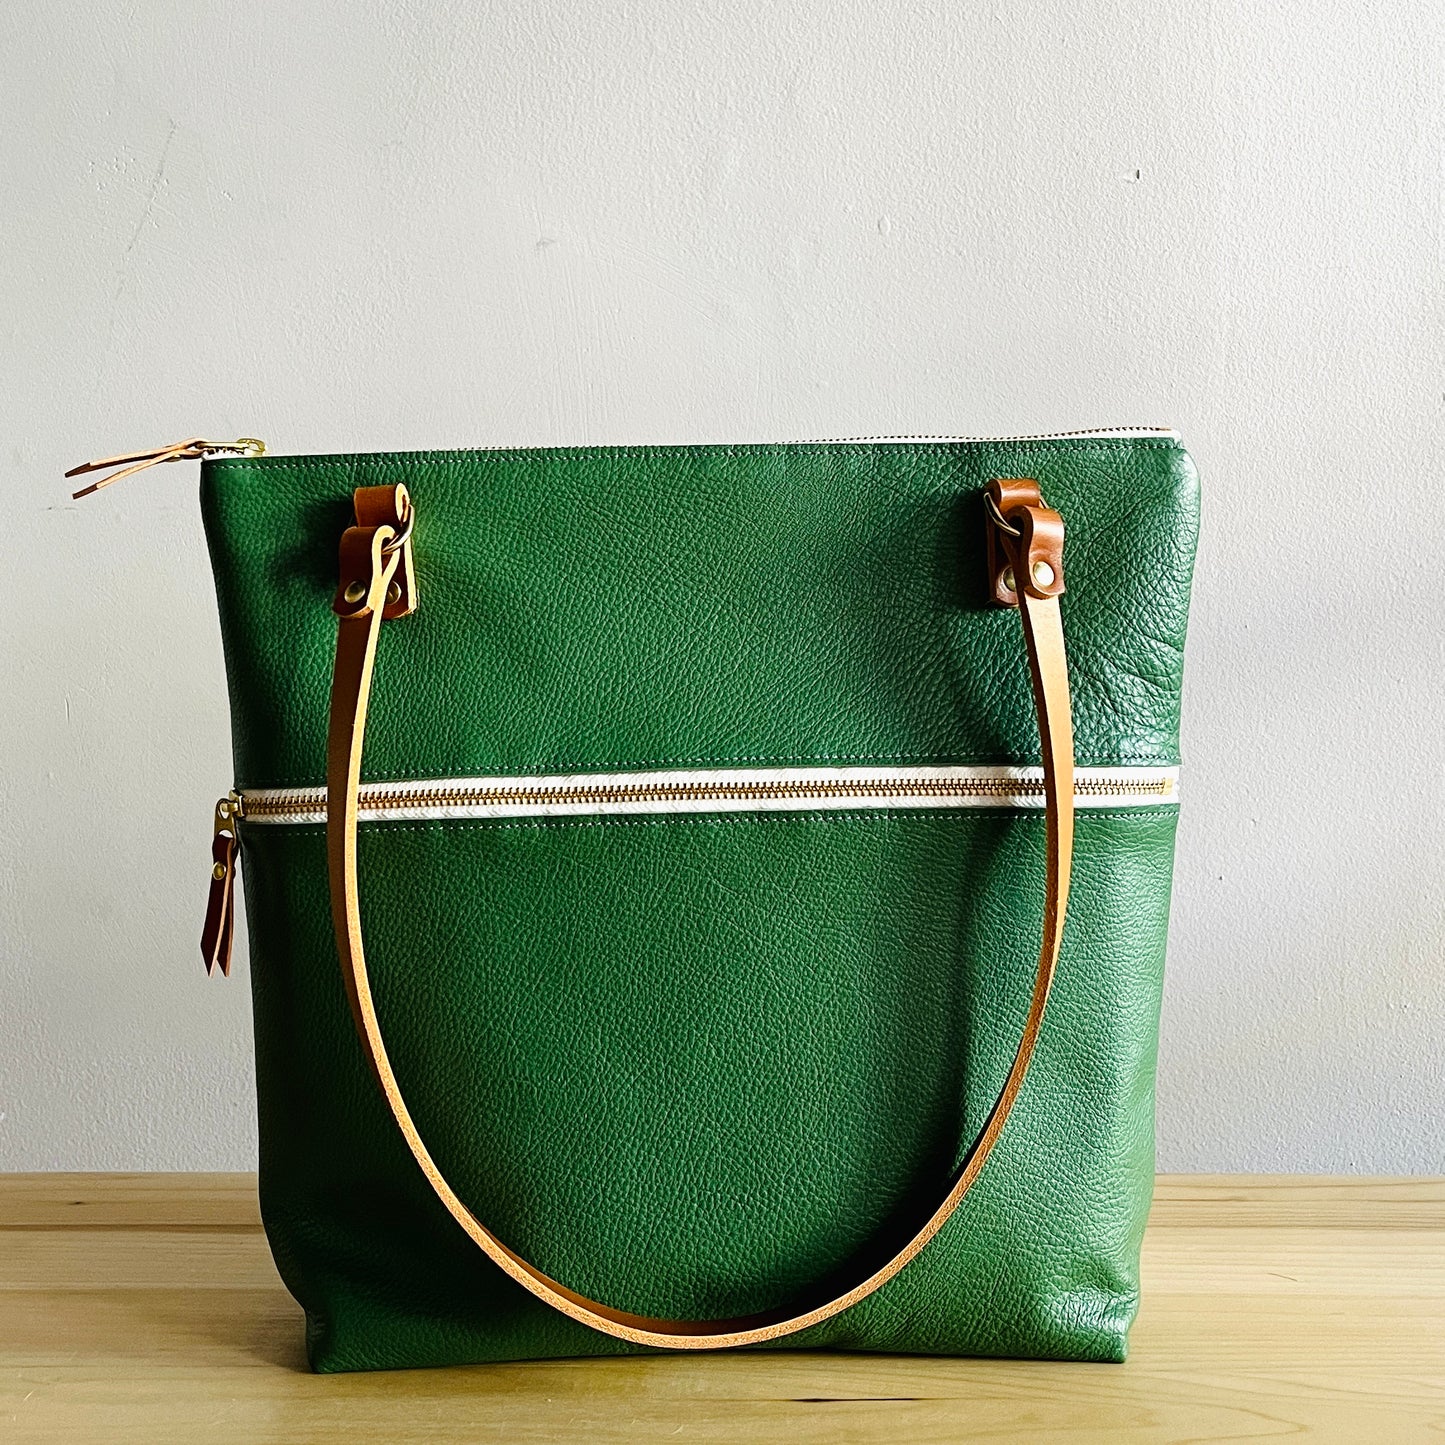 moss green leather shoulder bag by Suzanne Faris